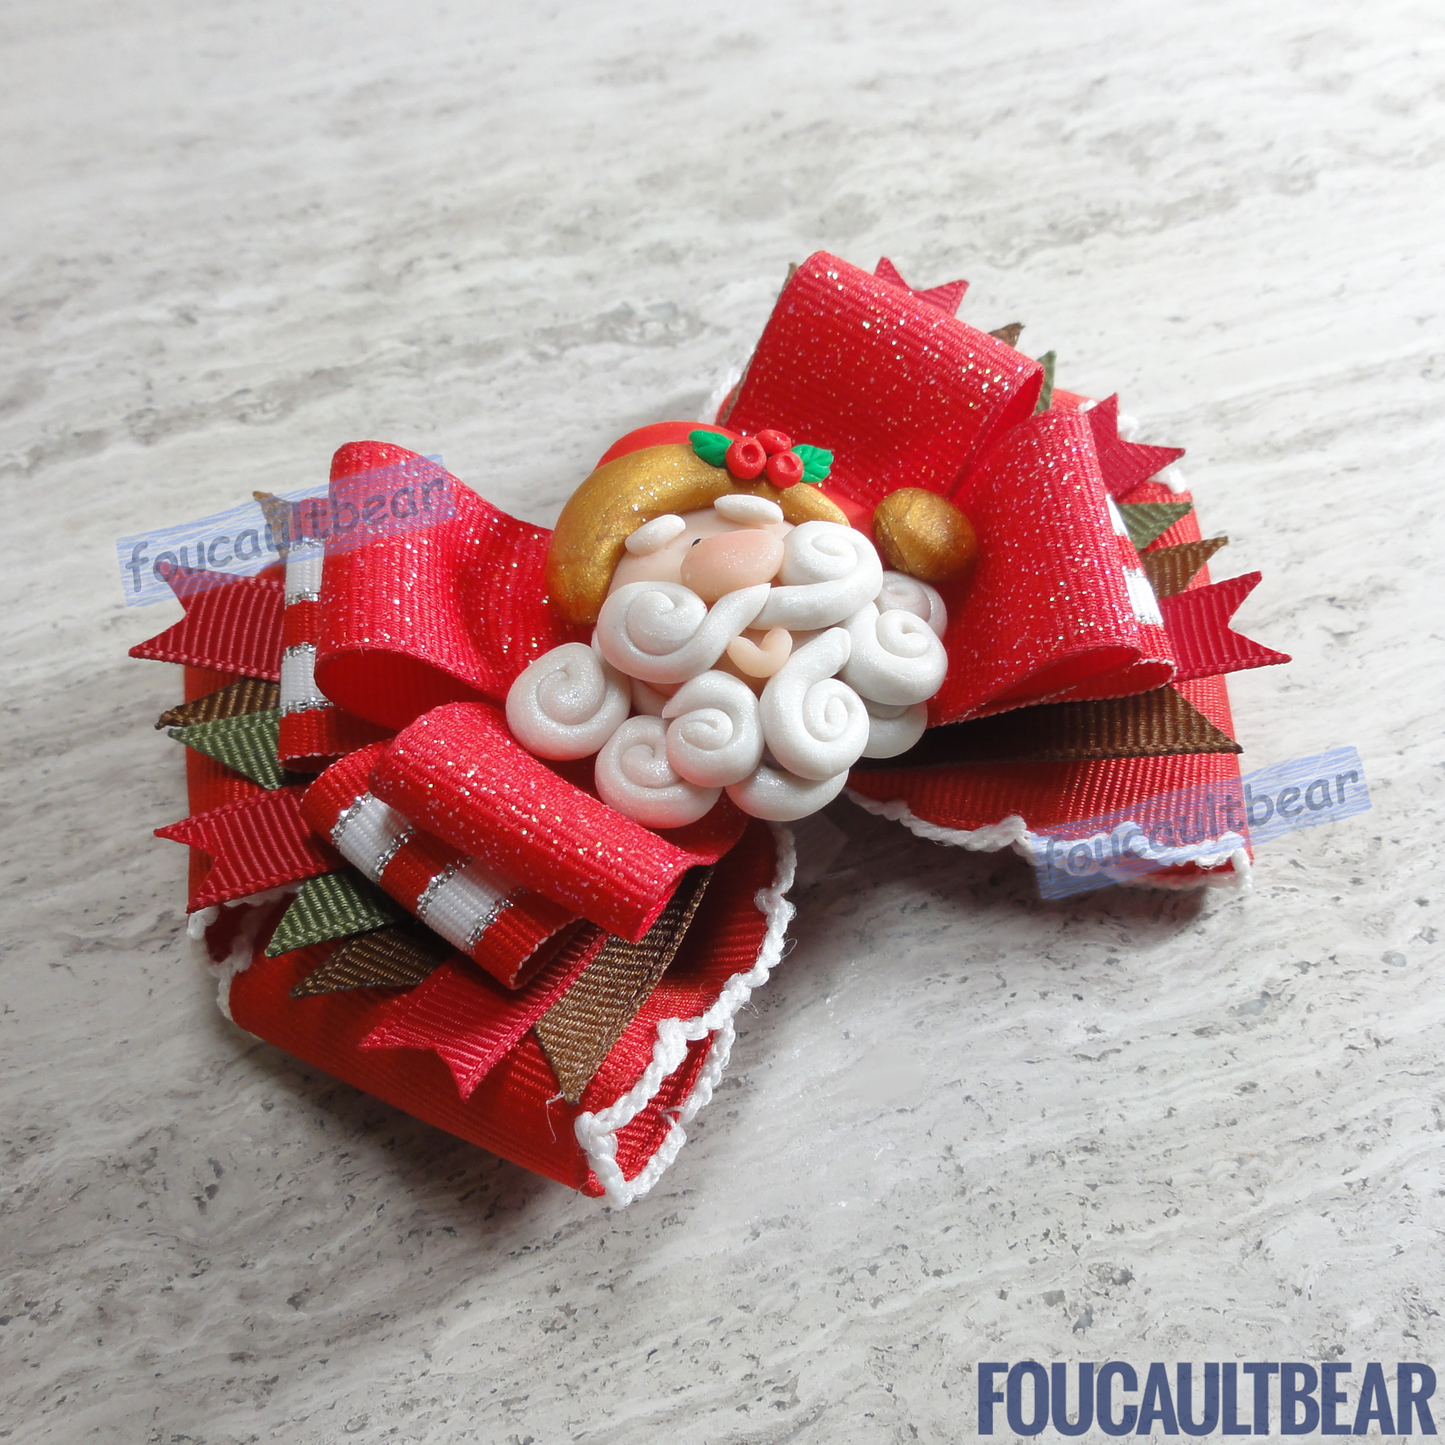 Foucaultbear's HANDMADE MULTI-LAYERED HAIR BOW CLIP with CLAY CENTERPIECE. Jolly Santa Claus with Gold Trim. Handmade Polymer Clay Centerpiece. Grosgrain Ribbon. French Barrette Hair Bow for Ponytail & Pigtails. Jolly Father Santa Claus with Gold Trim centerpiece adorns this hair bow barrette. Perfect for toddlers, preschoolers, kindergartners, elementary or even middle-schoolers for the coming holiday season. Looks great on adults too! 